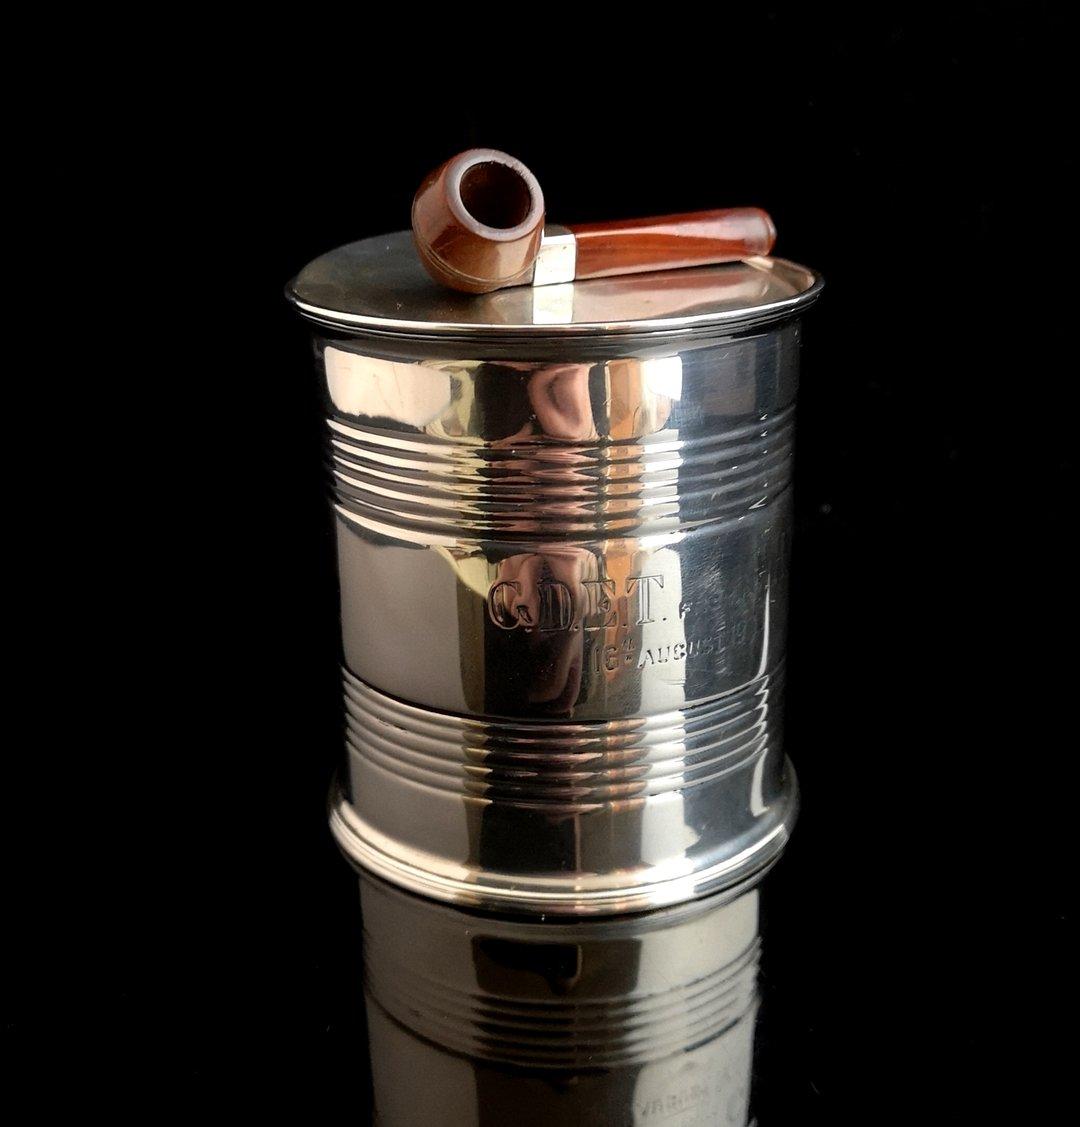 A very rare, novelty, antique sterling silver tobacco tin or box.

It has been designed as an empty can, very realistically detailed and similar in size to a regular food can.

It has a lift off lid, also in sterling silver with a miniature phenolic